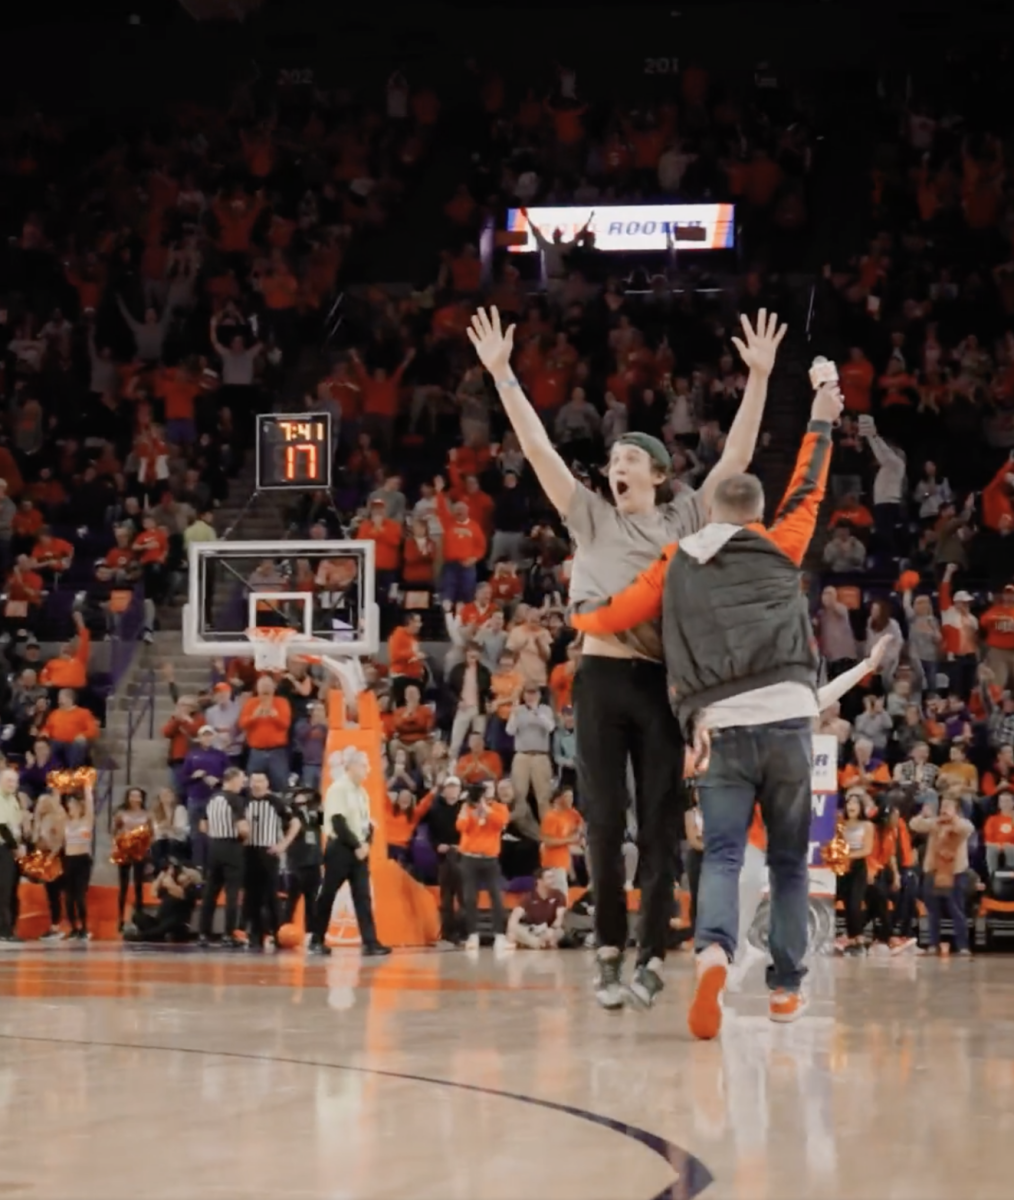 Kevin Murphy, a freshman computer science major, celebrates on the court of Littlejohn Coliseum after making a golf putt to win $10,000. 